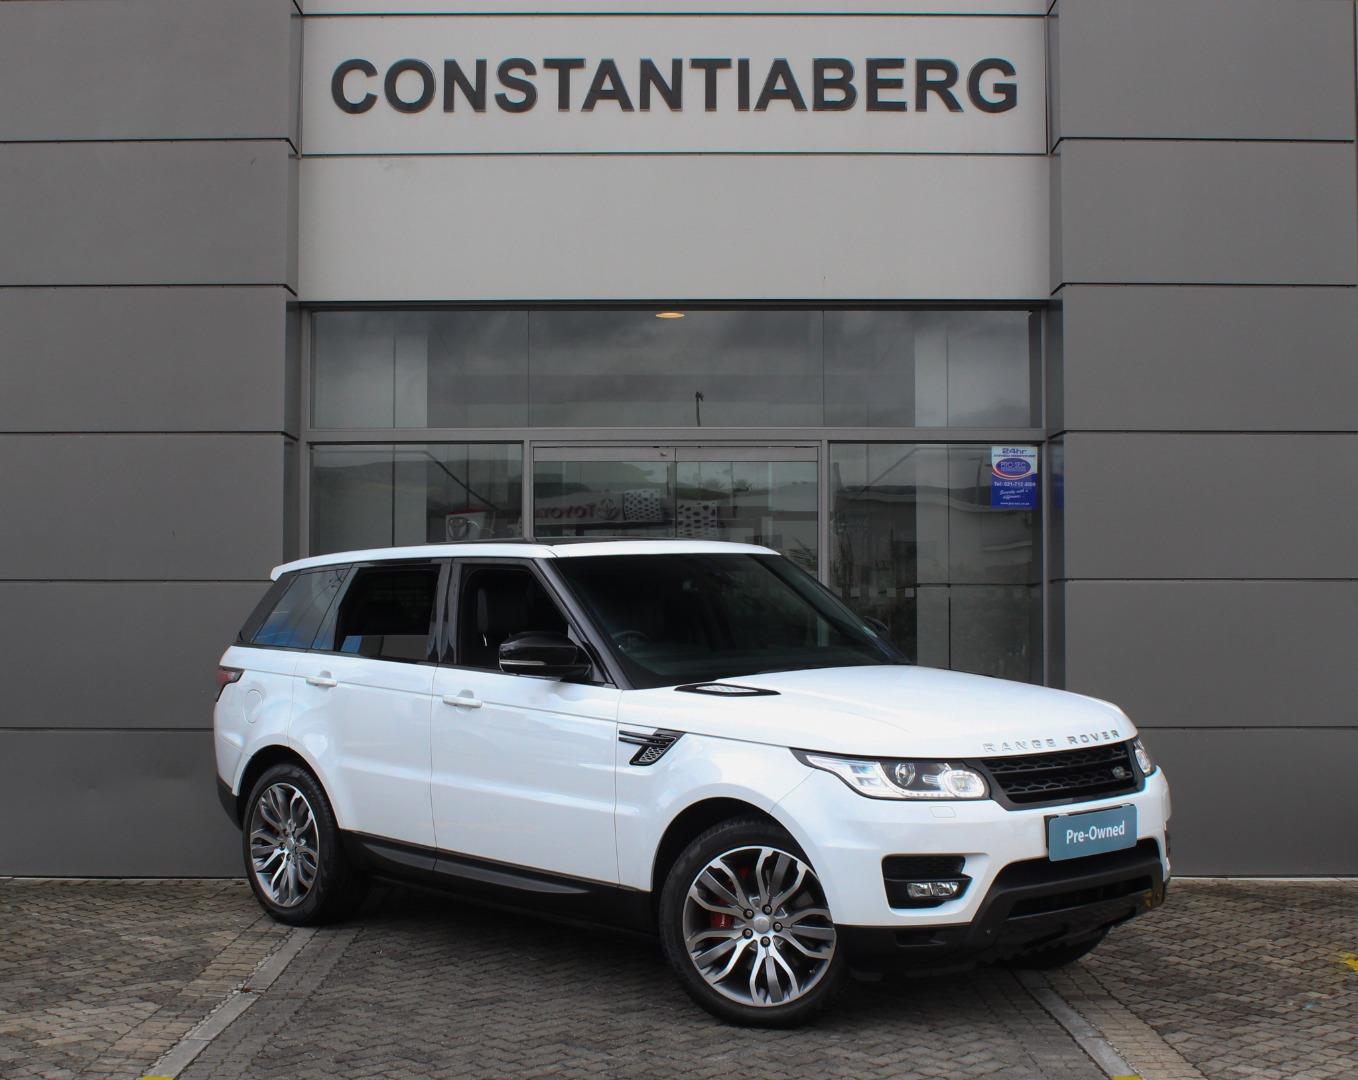 2015 Land Rover Range Rover Sport  for sale - 444445